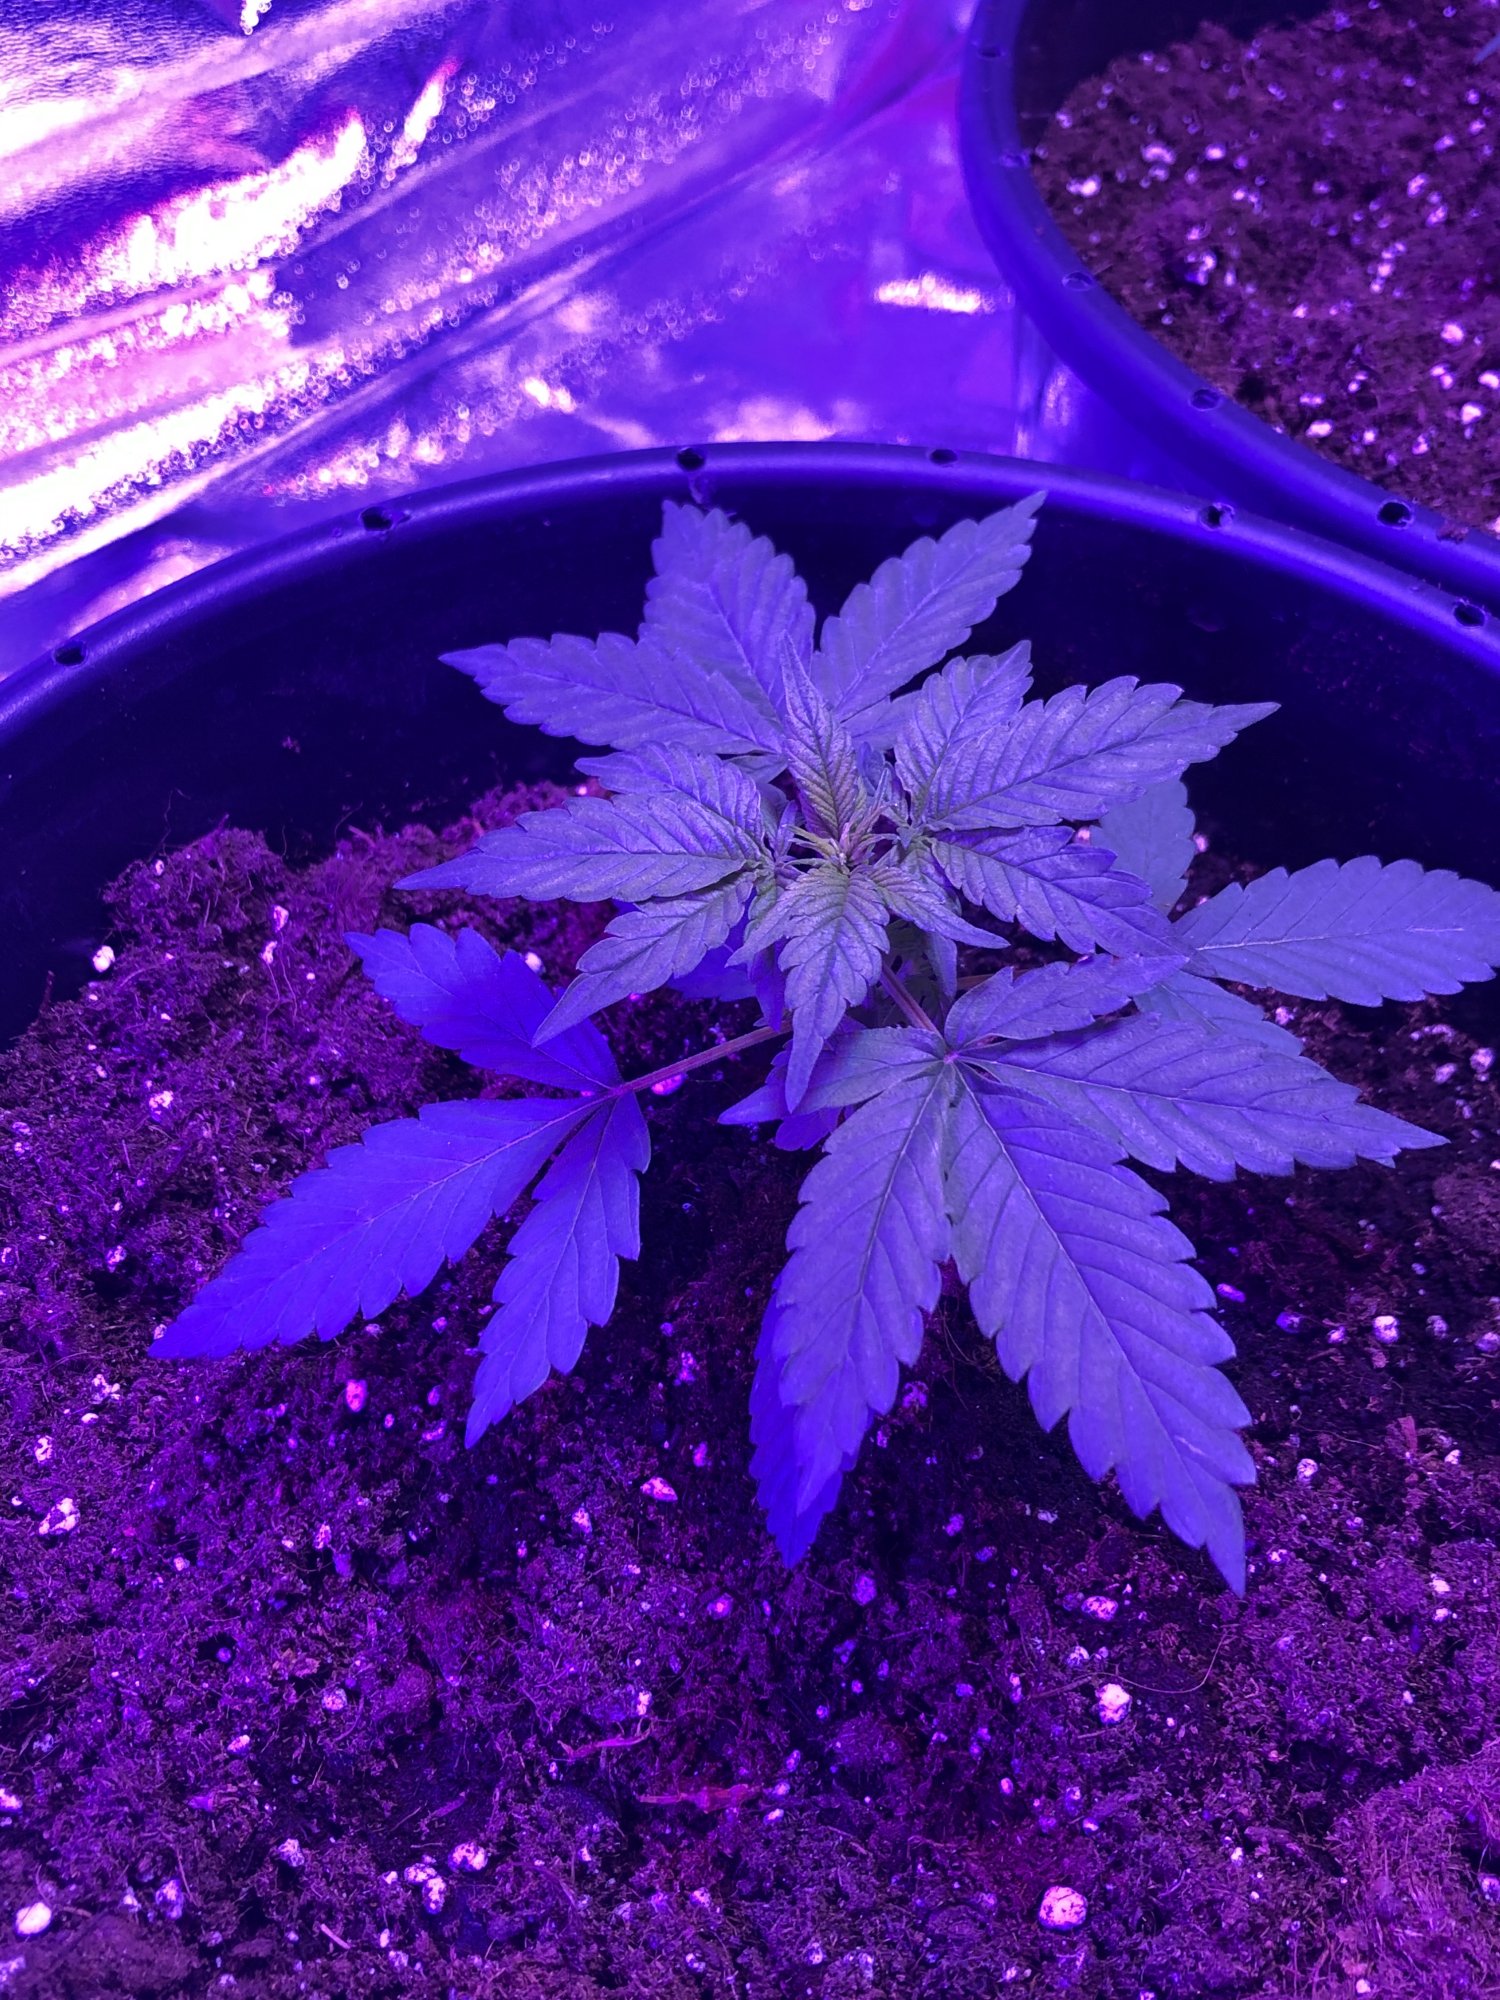 First timer autos colorado cookie wish me luck